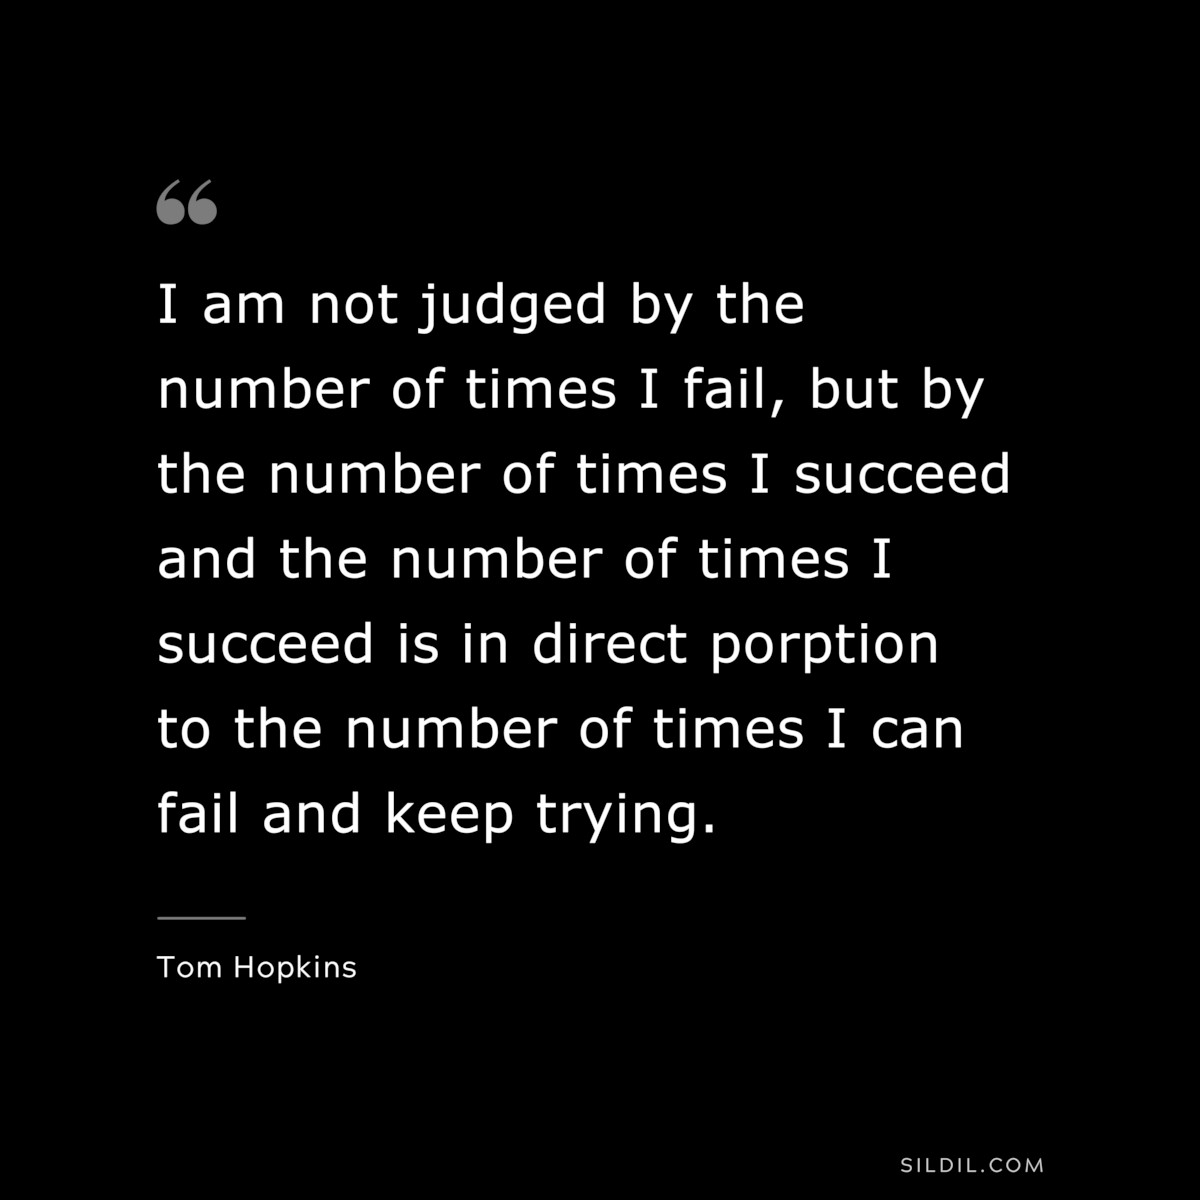 I am not judged by the number of times I fail, but by the number of times I succeed and the number of times I succeed is in direct porption to the number of times I can fail and keep trying. ― Tom Hopkins